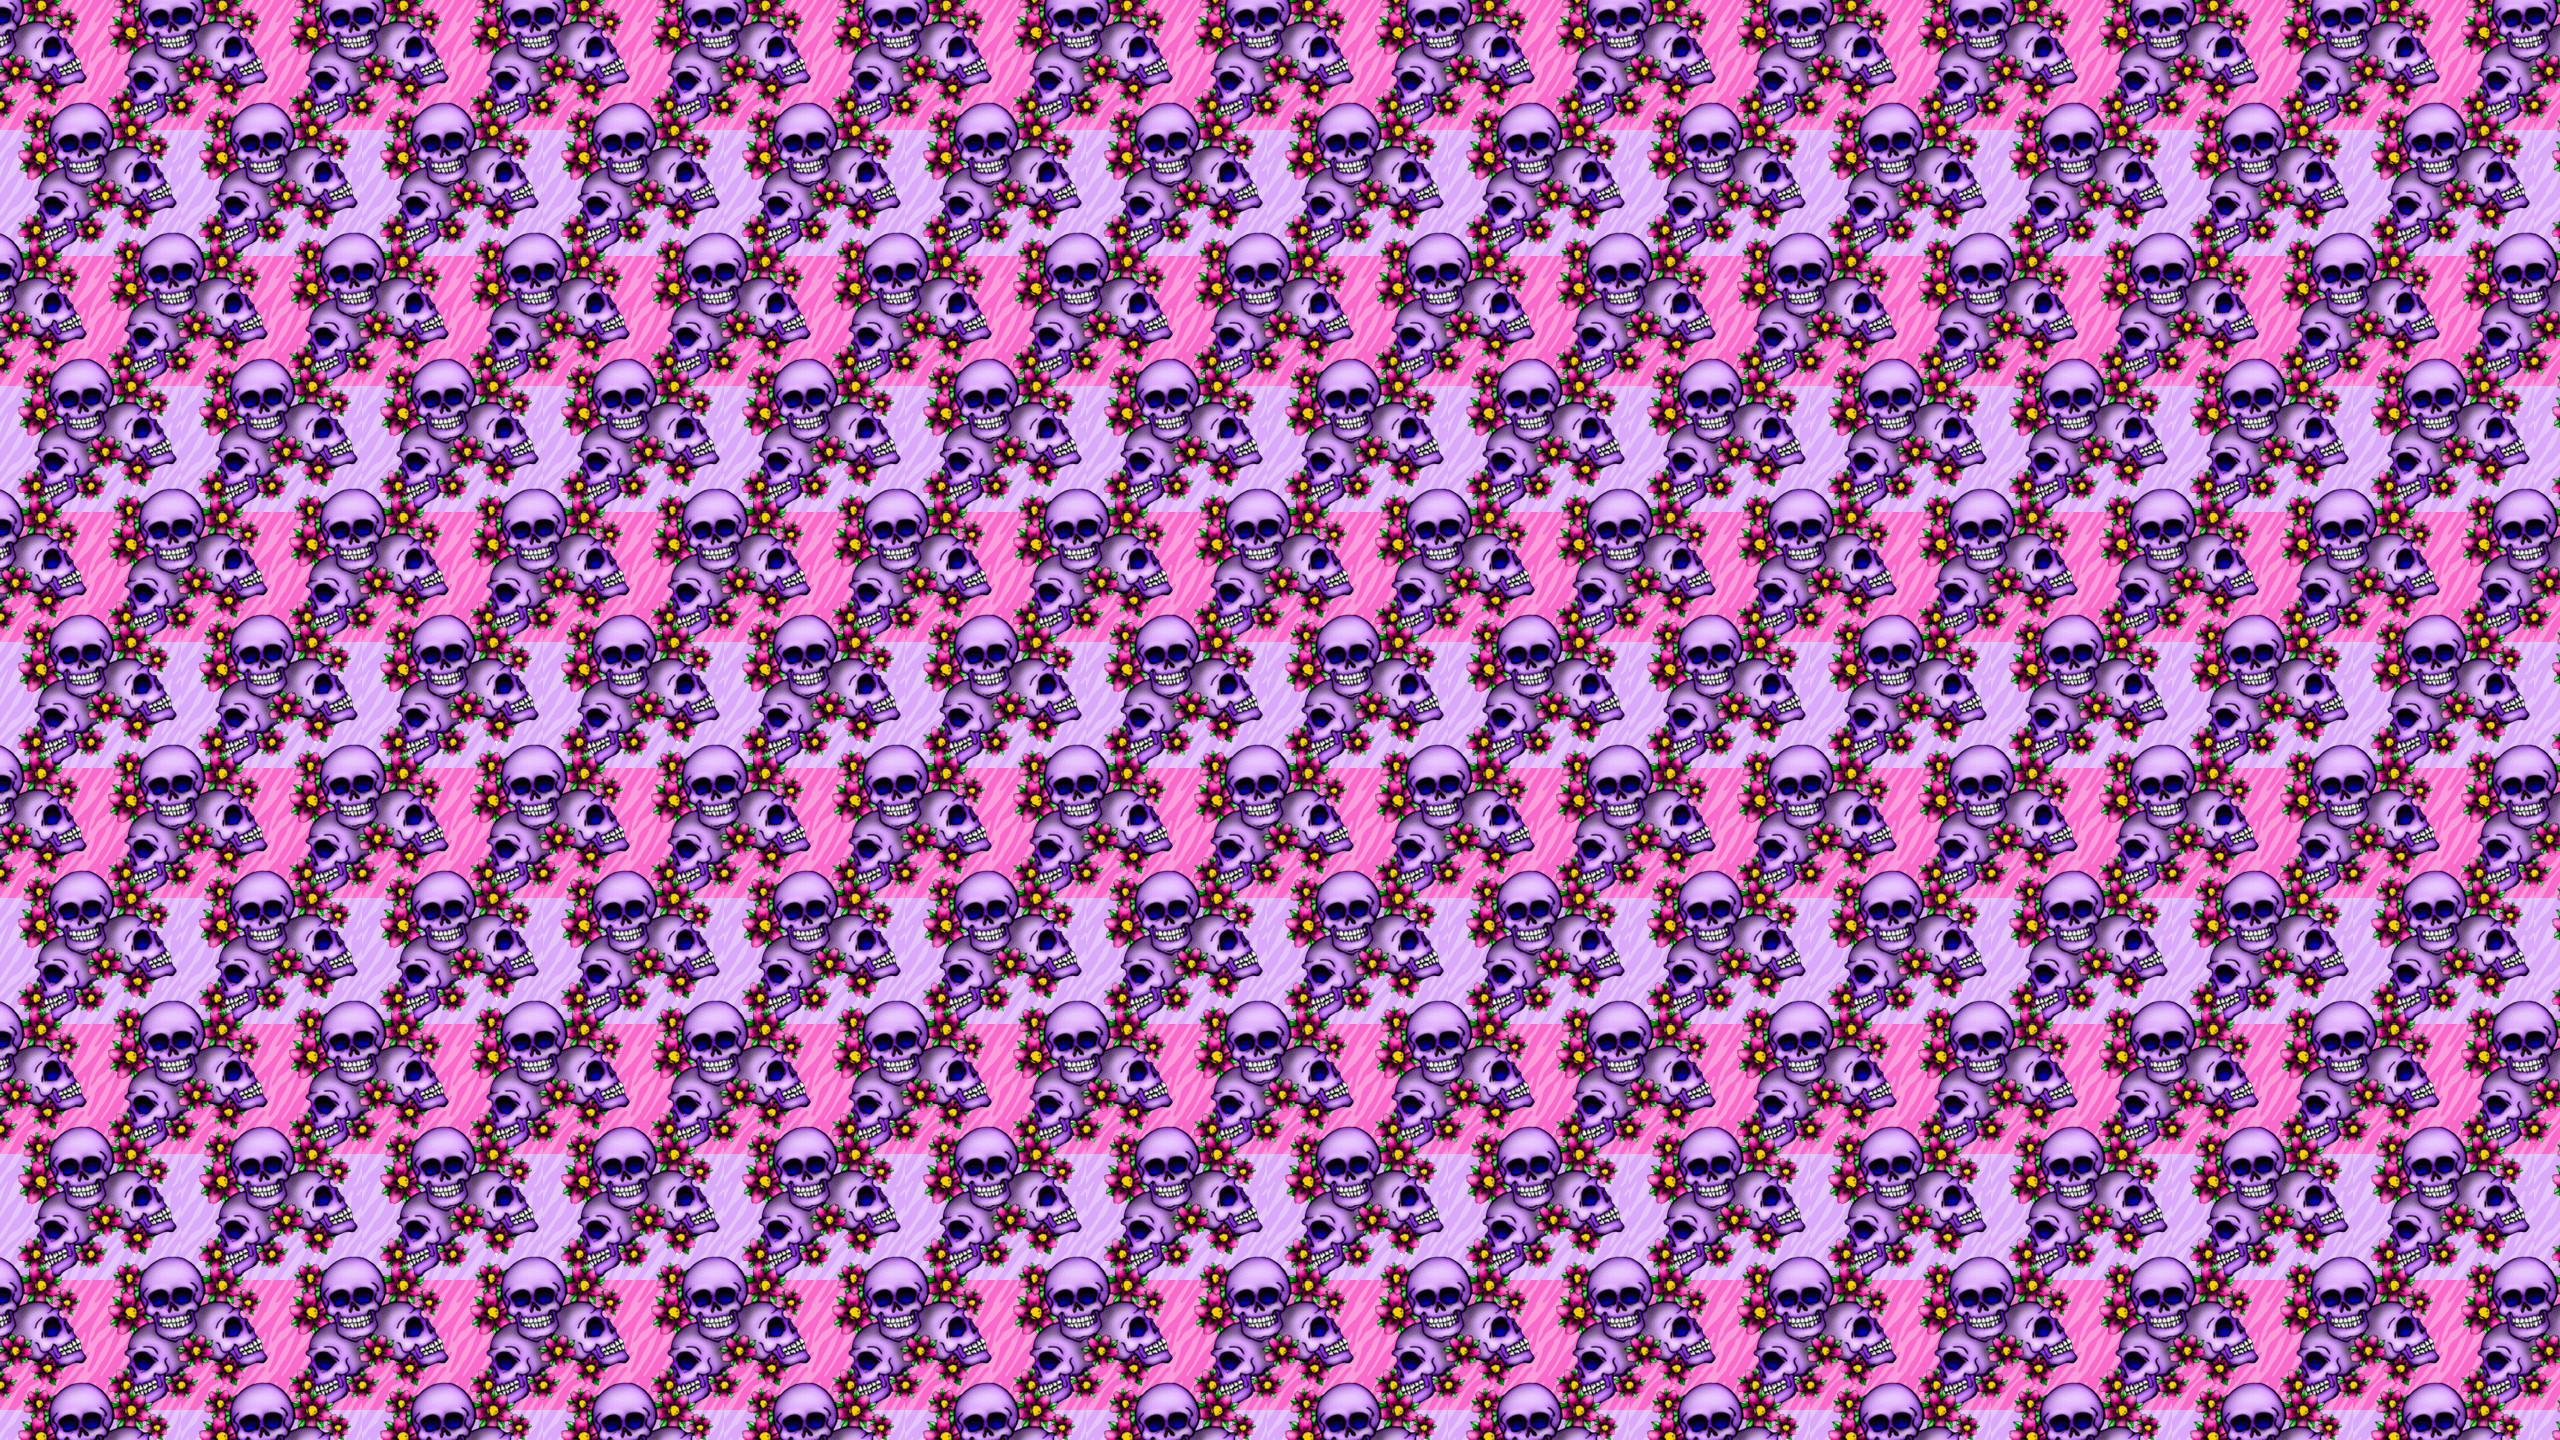 2560x1440 Pink foral skull background / wallpaper for iPhone or iPod | Just .